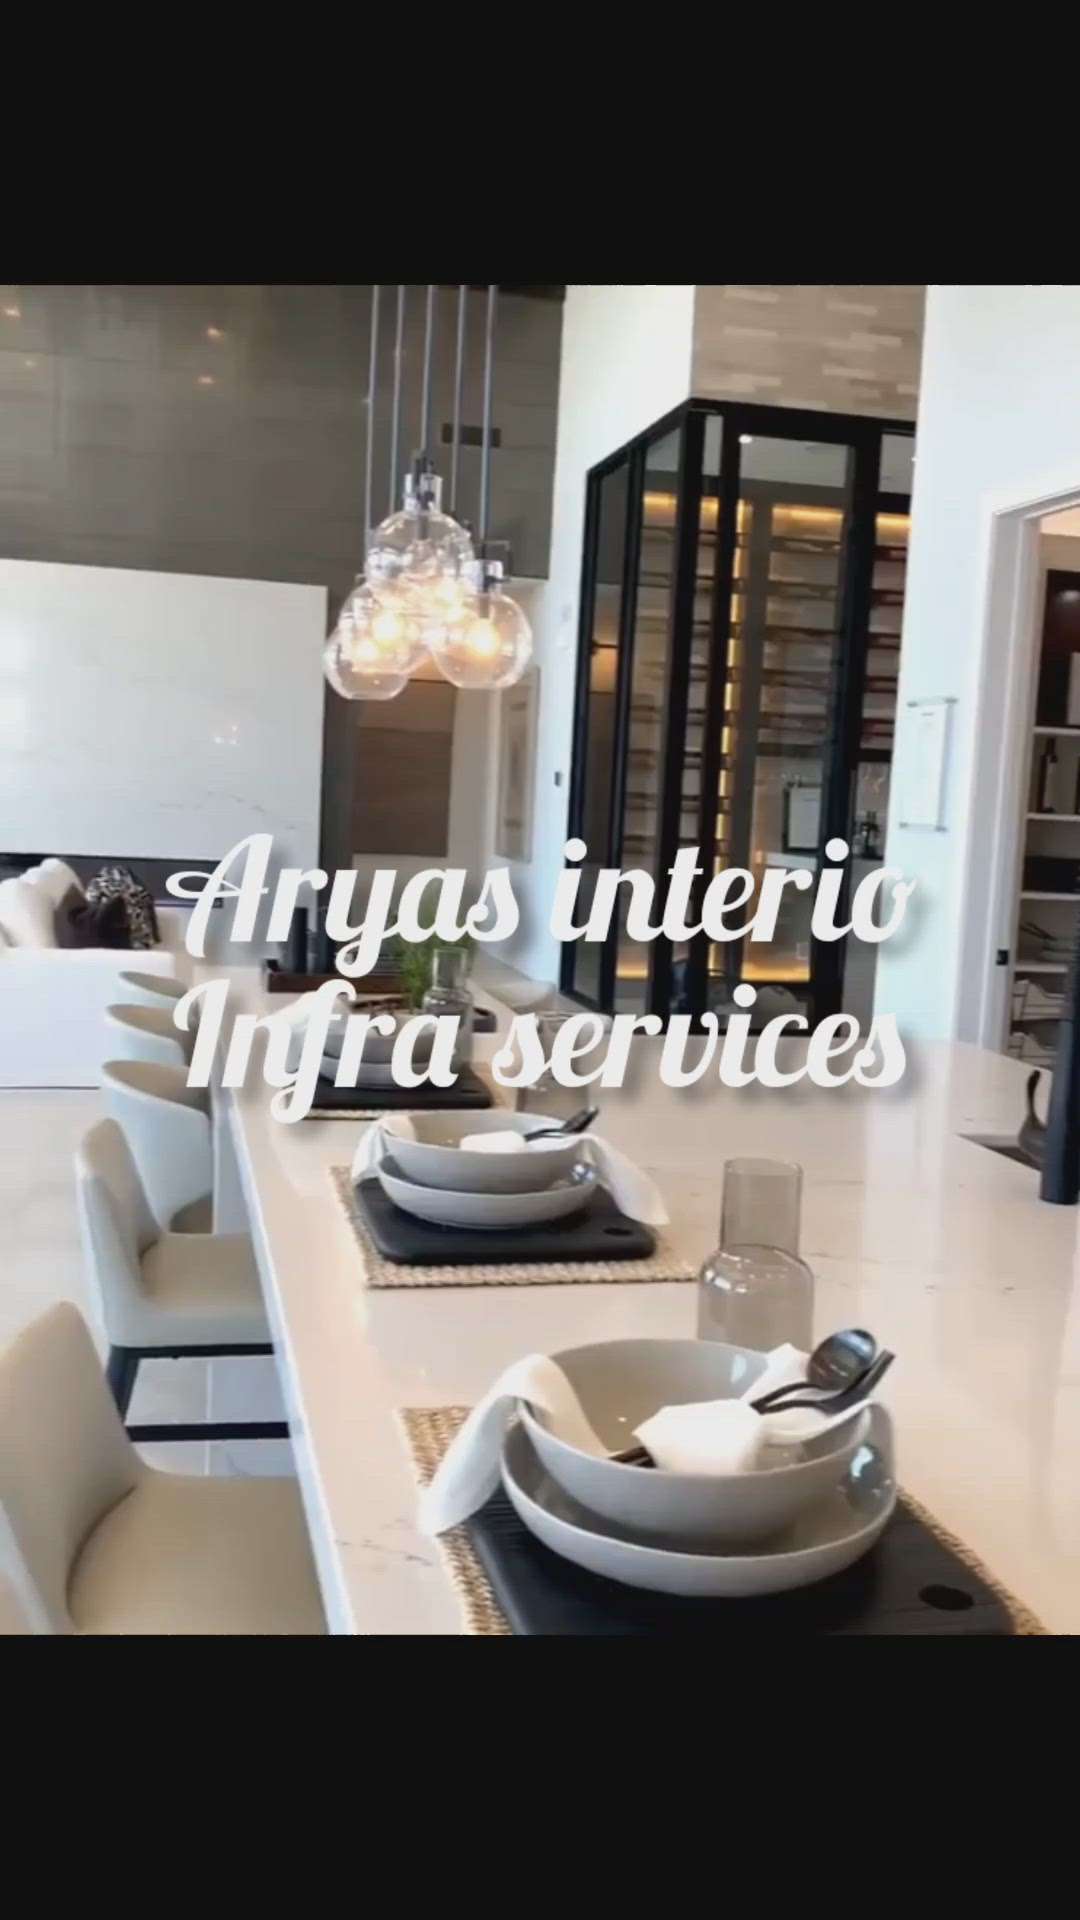 Give your home a new look, luxury flat interiors services by Design Interios a unit of Aryas interio & Infra Services,
Provide complete end to end Professional Construction & interior Services in Delhi Ncr, Gurugram, Ghaziabad, Noida, Greater Noida, Faridabad, chandigarh, Manali and Shimla. Contact us right now for any interior or renovation work, call us @ +91-7018188569 &
Visit our website at www.designinterios.com
Follow us on Instagram #aryasinterio and Facebook @aryasinterio .
#uttarpradesh #construction_himachal
#noidainterior #noida #delhincr #delhi #Delhihome  #noidaconstruction #interiordesign #interior #interiors #interiordesigner #interiordecor #interiorstyling #delhiinteriors #greaternoida #faridabad #ghaziabadinterior #ghaziabad  #chandigarh